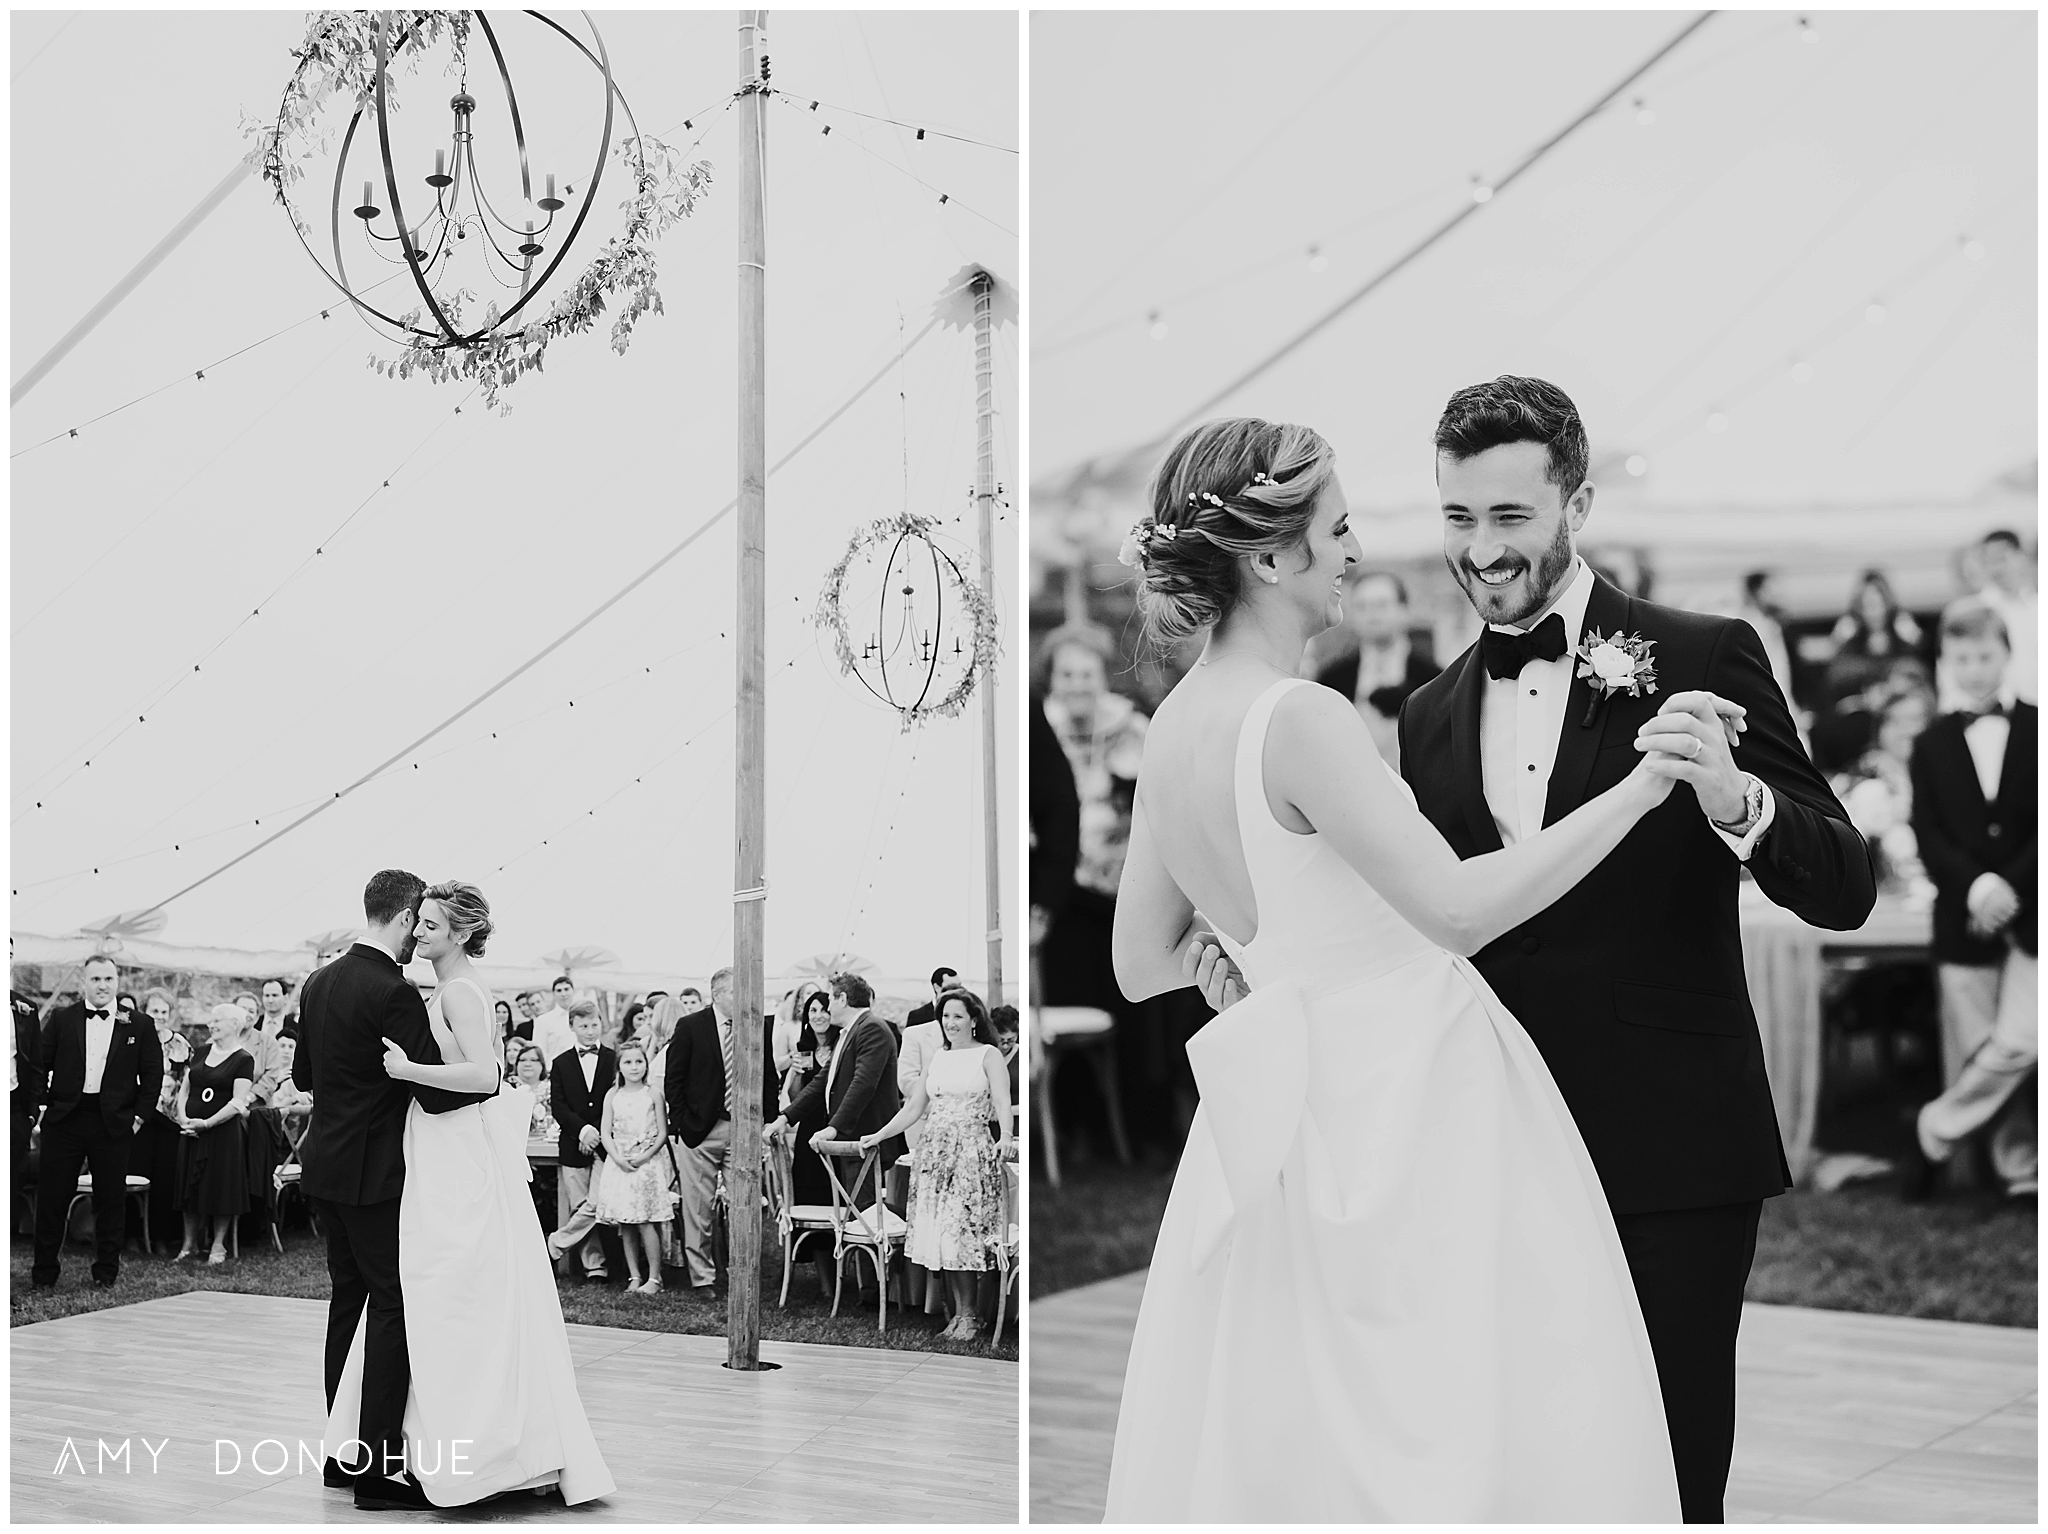 Black and White photos the first dance | Elegant Tent Reception on the Back Lawn | Woodstock Inn & Resort | Vermont Wedding Photographer | © Amy Donohue Photography